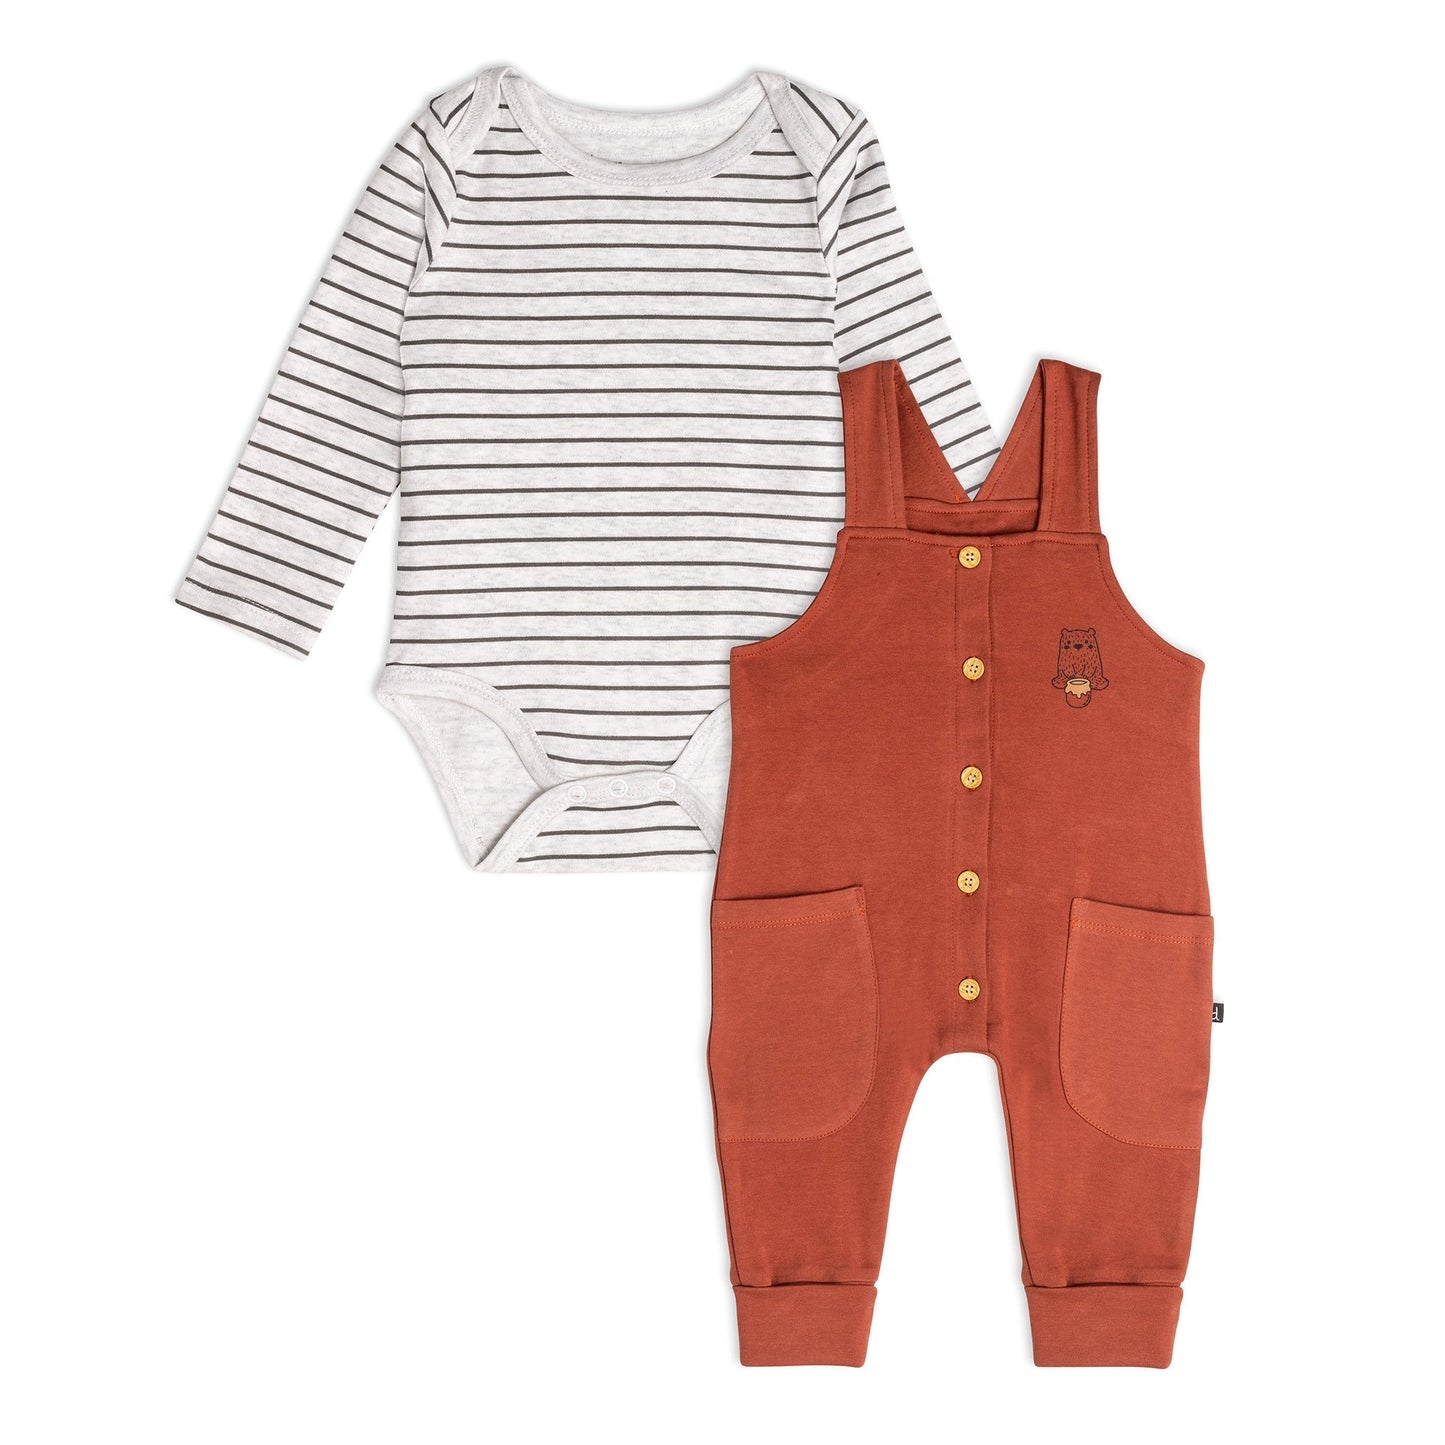 Organic Cotton Bodysuit And Overall Set Striped Rust And Heather Beige